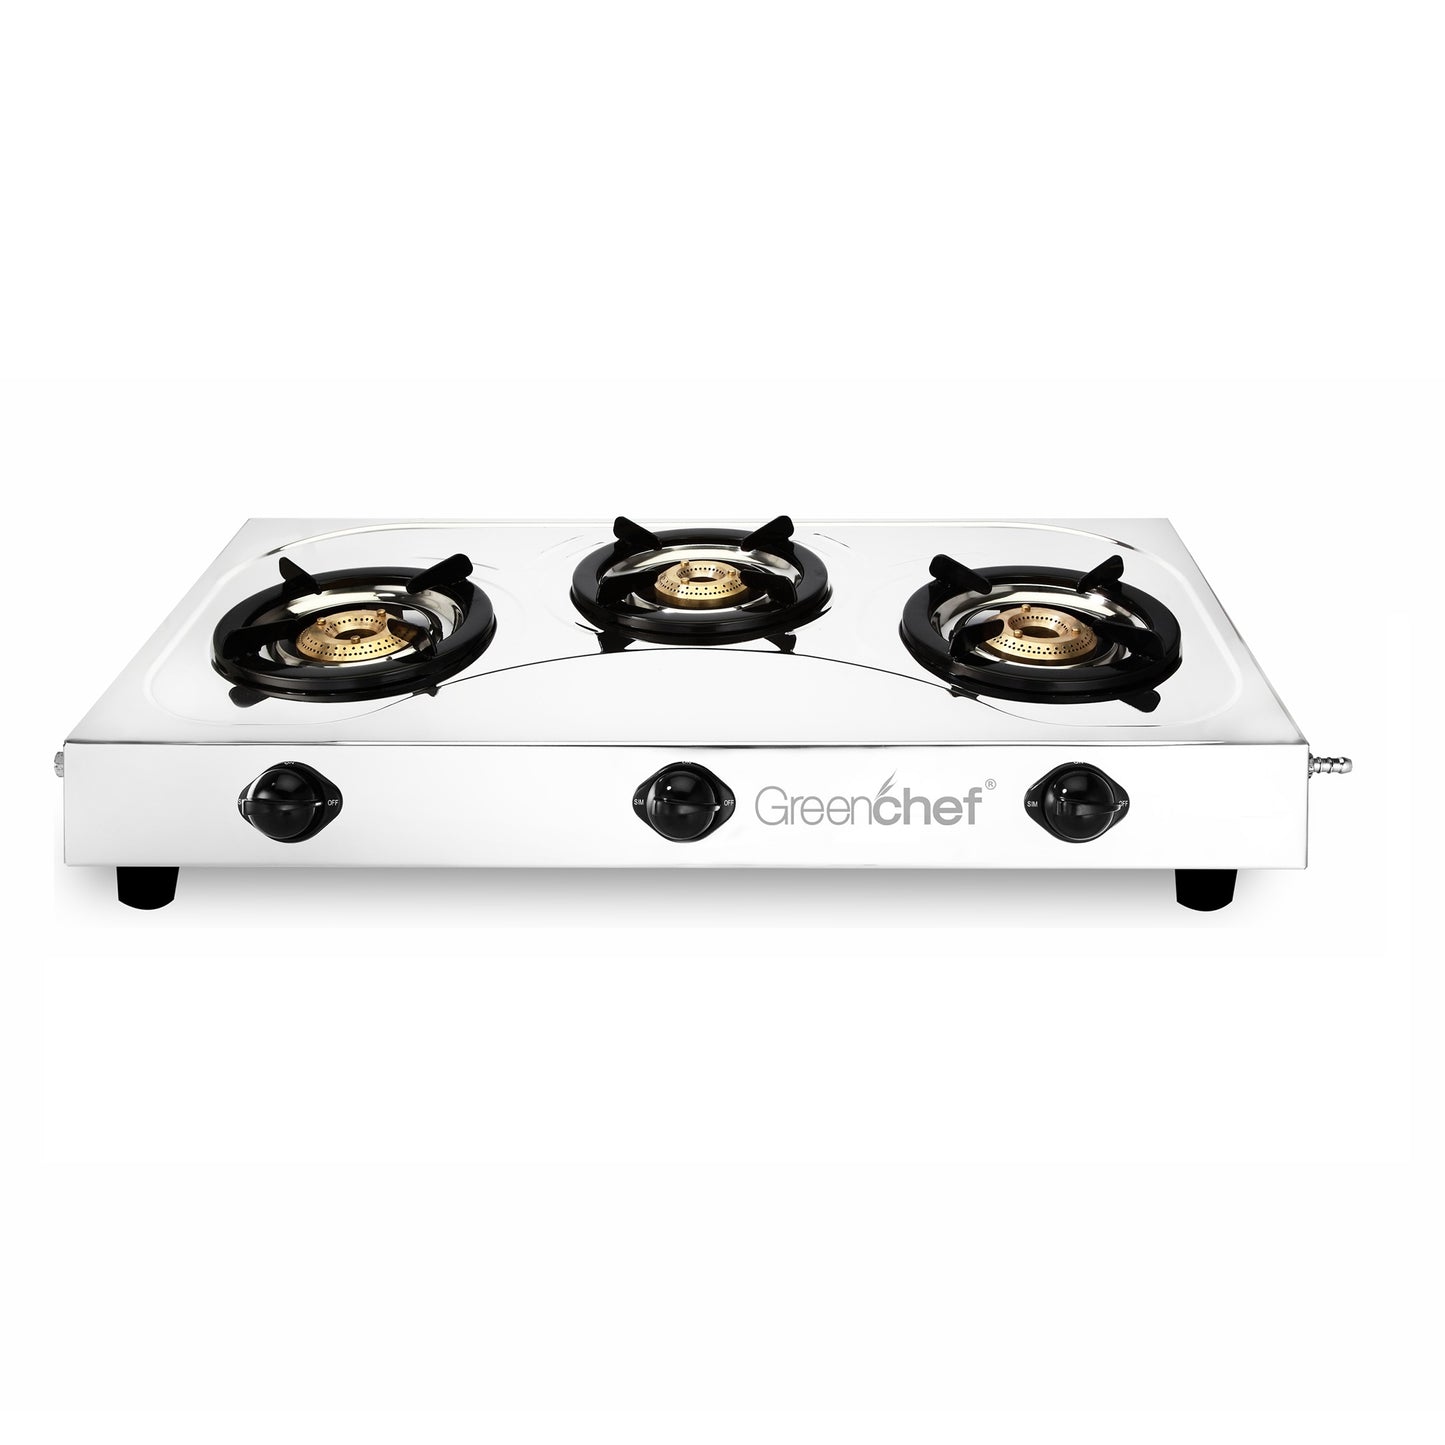 Greenchef Slim Stainless Steel Gas Stove, 3 Burner